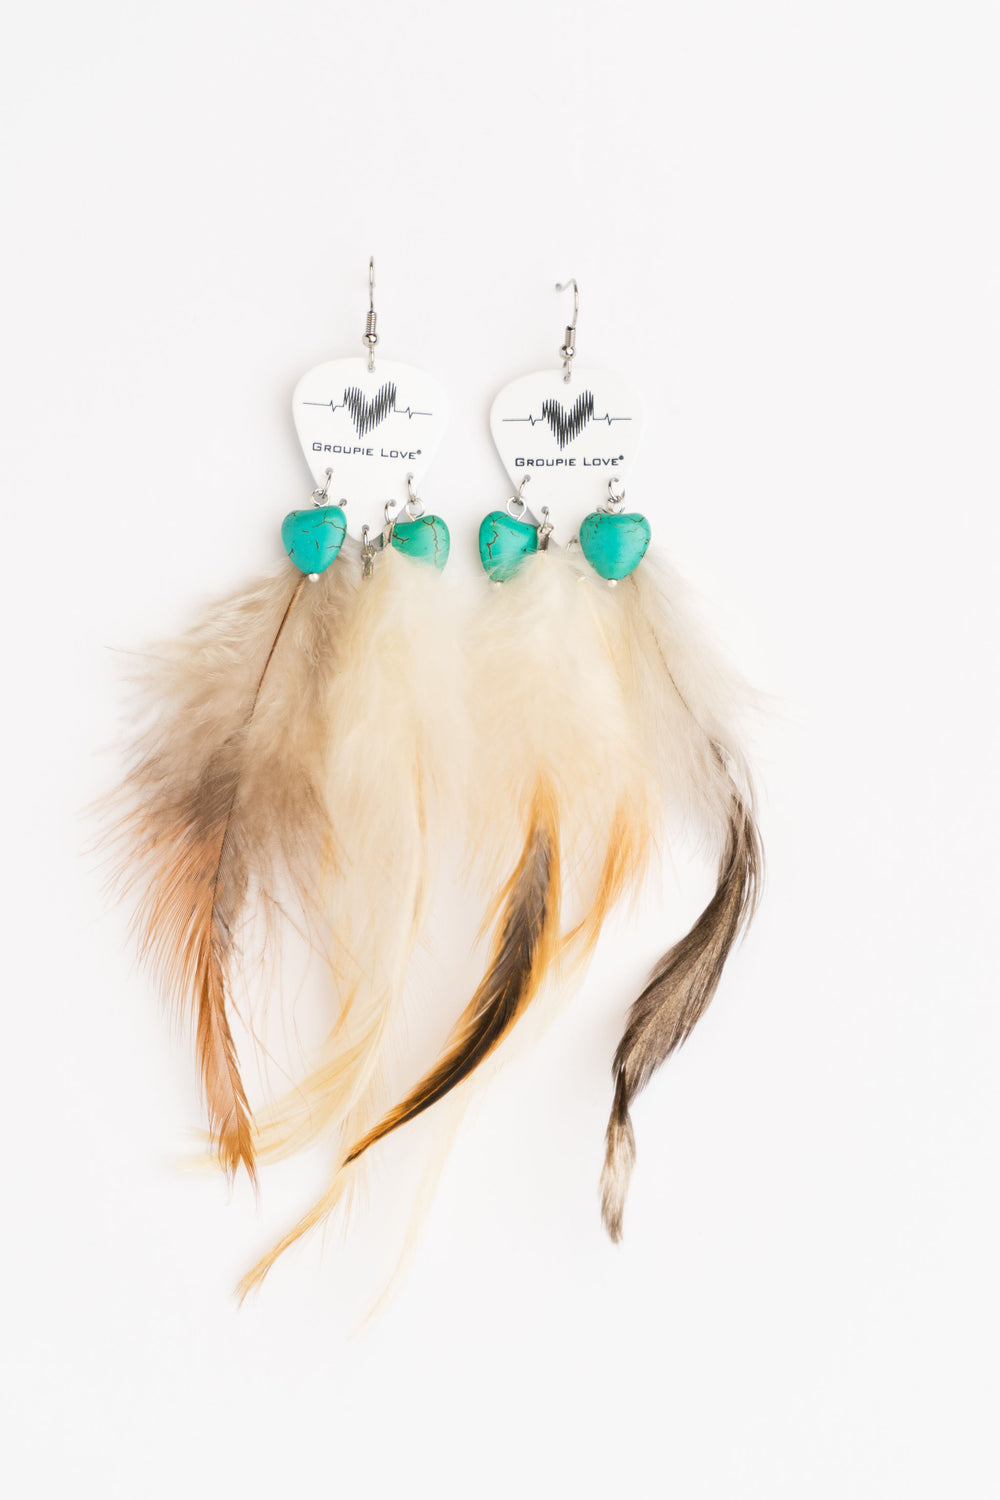 Groupie Love Classic Turquoise Hearts Feather Guitar Pick Earrings